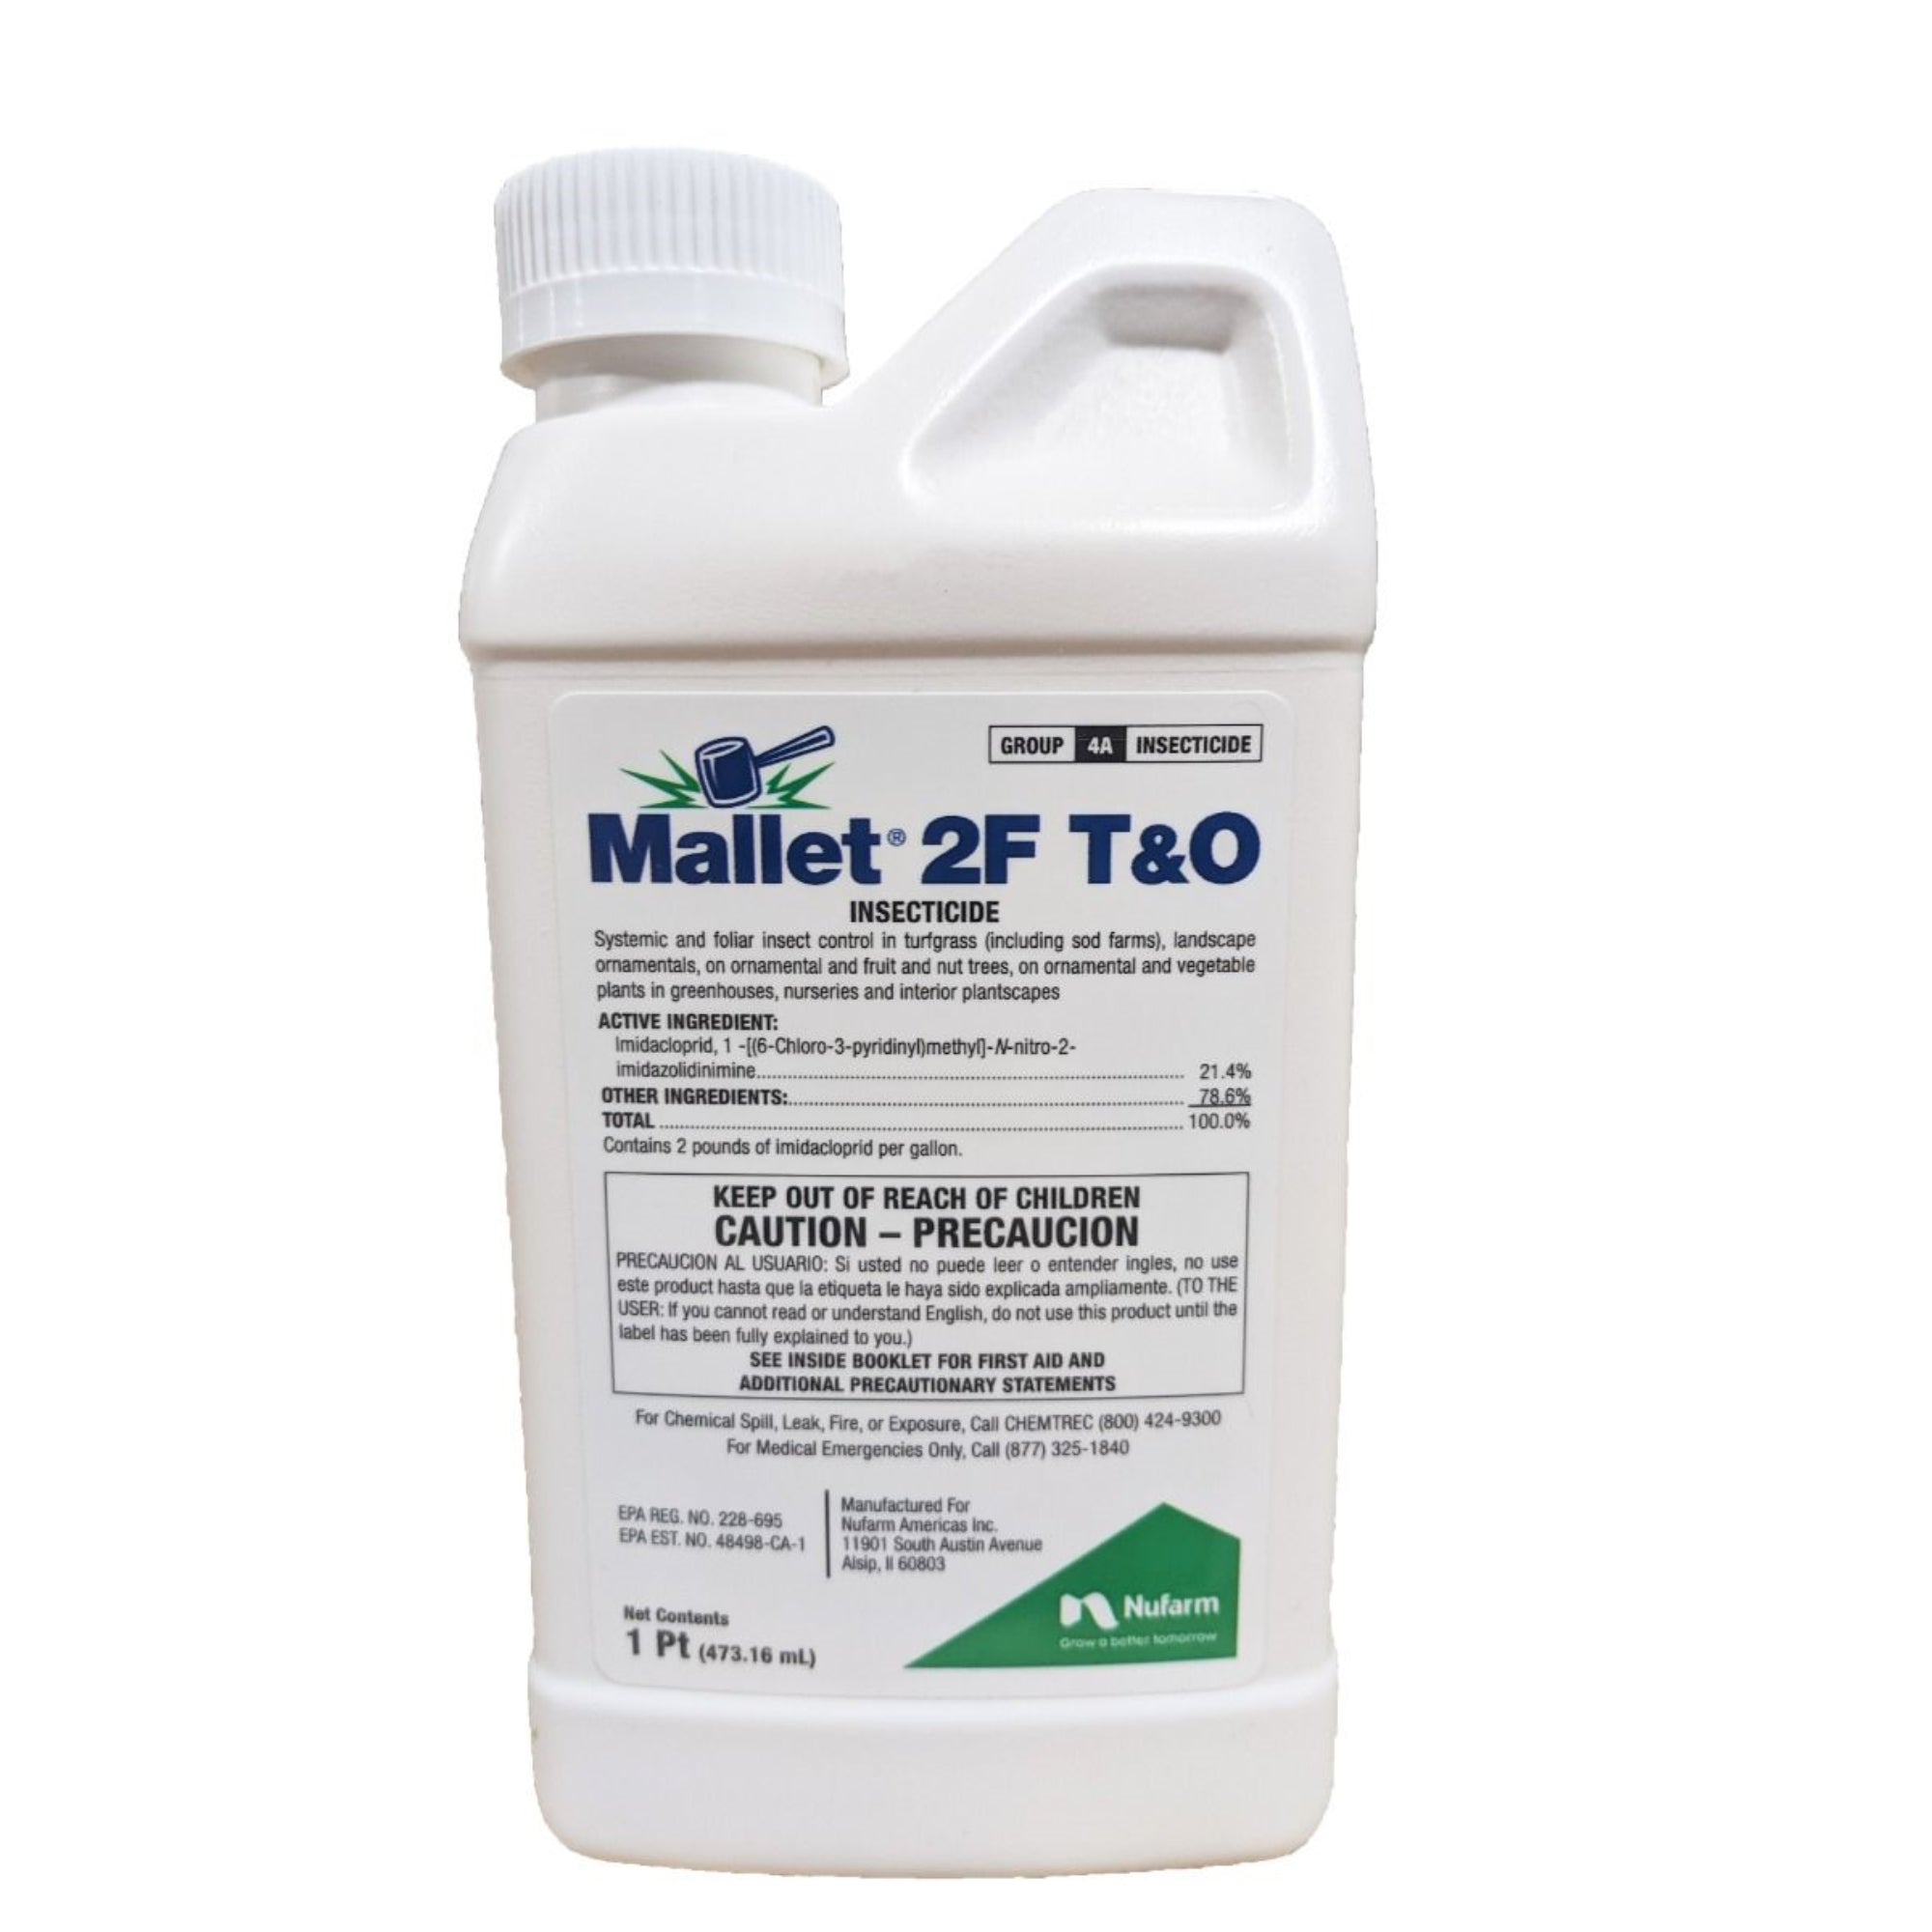 Nufarm Mallet T&O Commercial and Residential Insecticide Concentrate, 1 pt